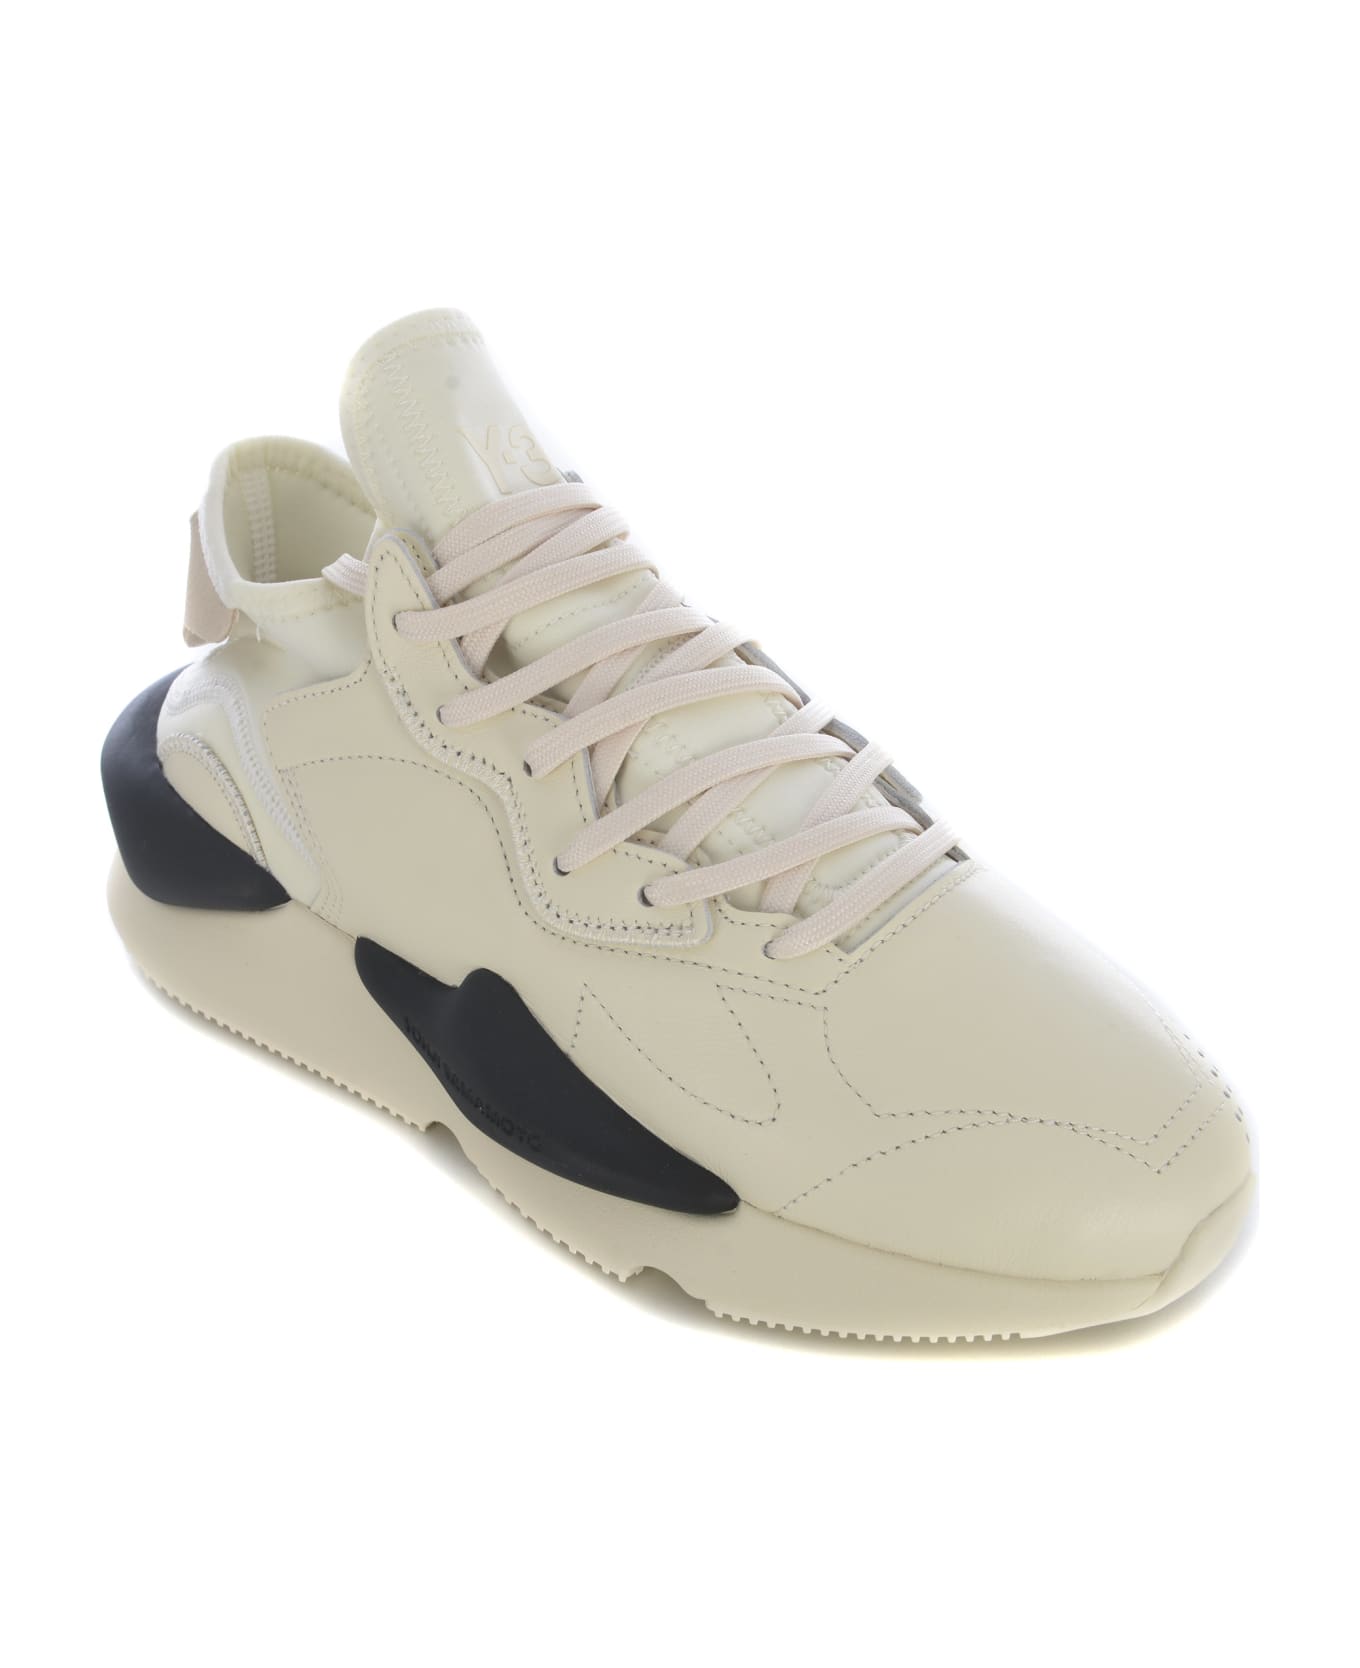 Y-3 Sneakers Y-3 "kaiwa" Made With Leather Upper - Crema